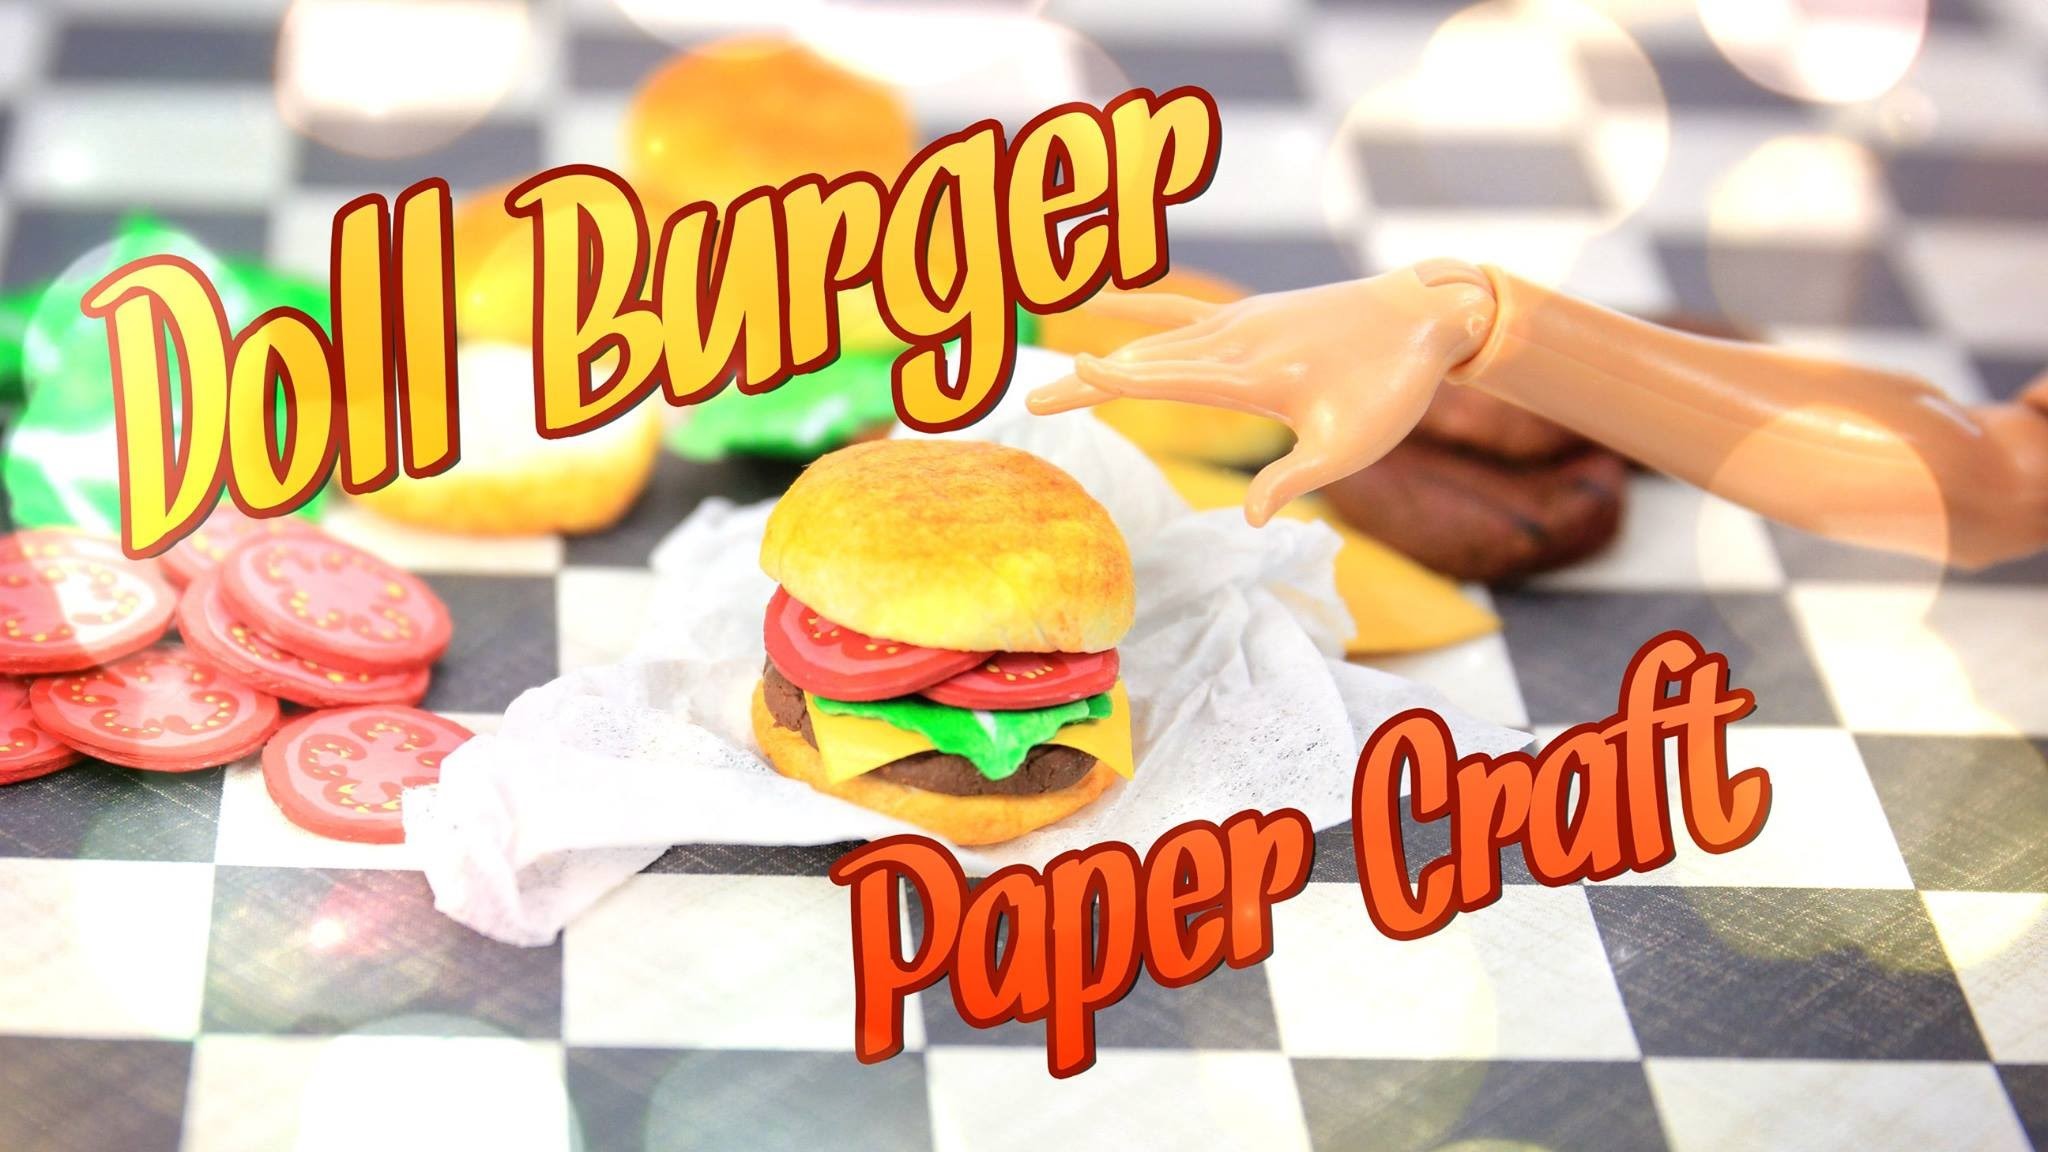 How to Make a Doll Hamburger - Paper Doll Crafts